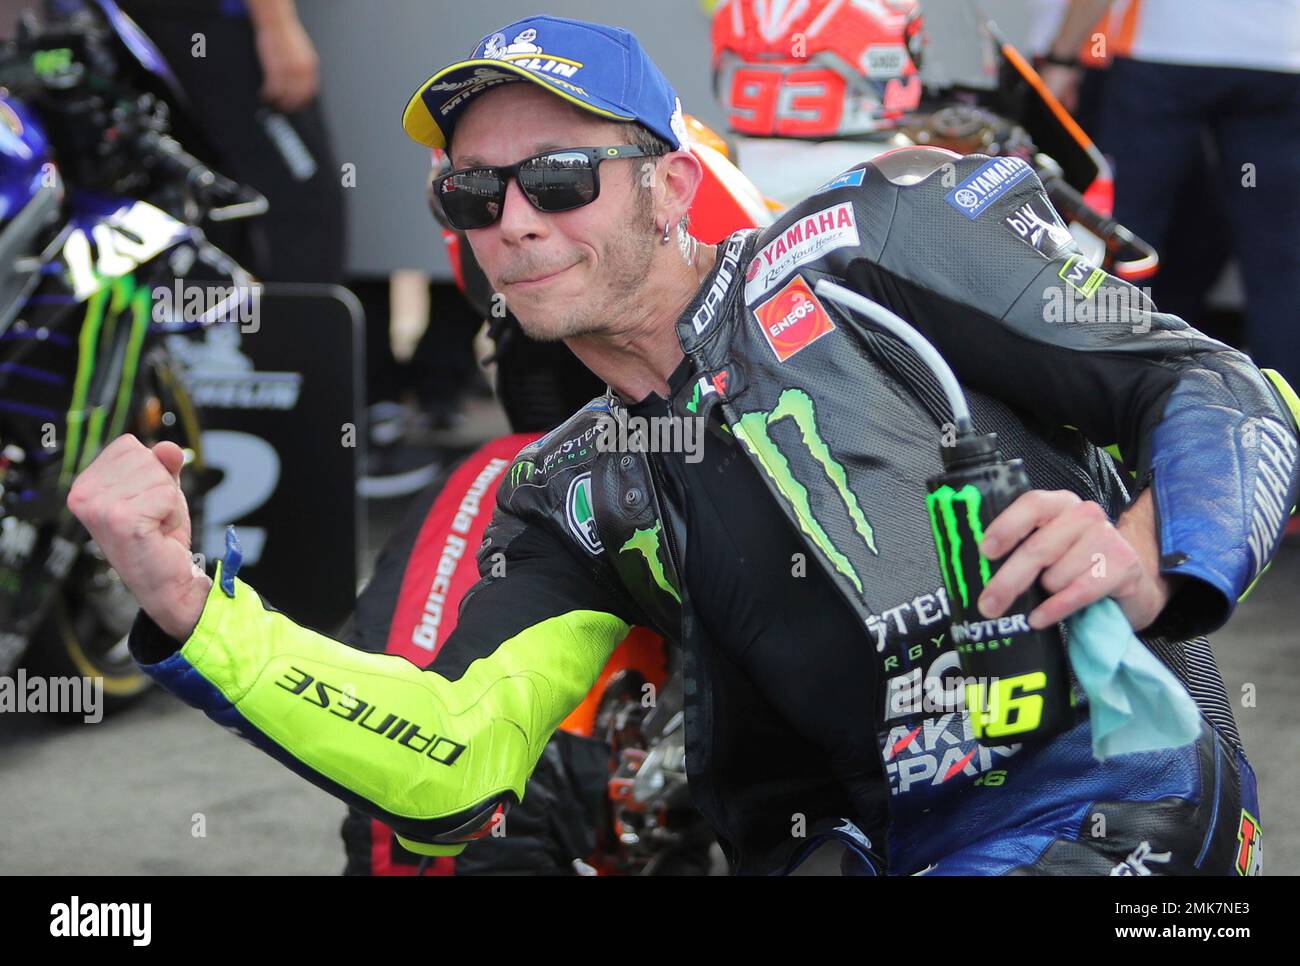 Valentino Rossi of Italy celebrates after winning second place in the Moto GP at the Termas de Rio Hondo circuit in Argentina, Sunday, March 31, 2019. (AP Photo/Nicolas Aguilera Stock Photo -